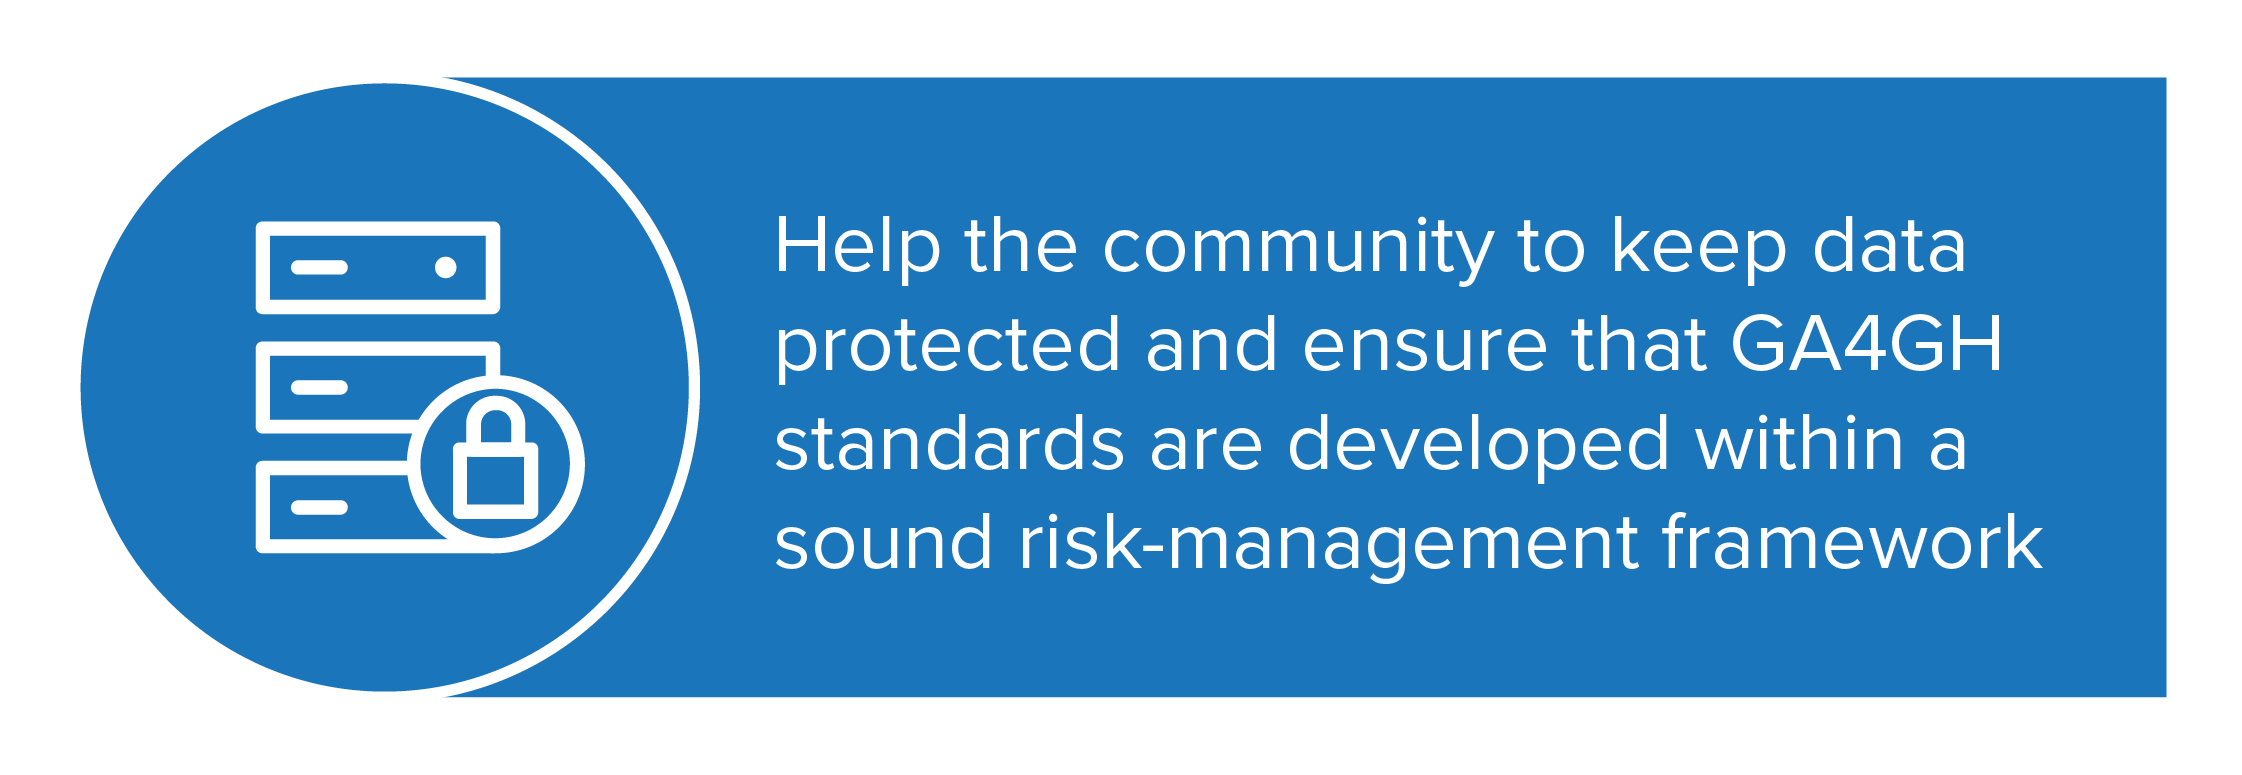 The Data Security Work Stream helps the community to keep data protected and ensure that GA4GH products are developed within a sound risk-management framework.